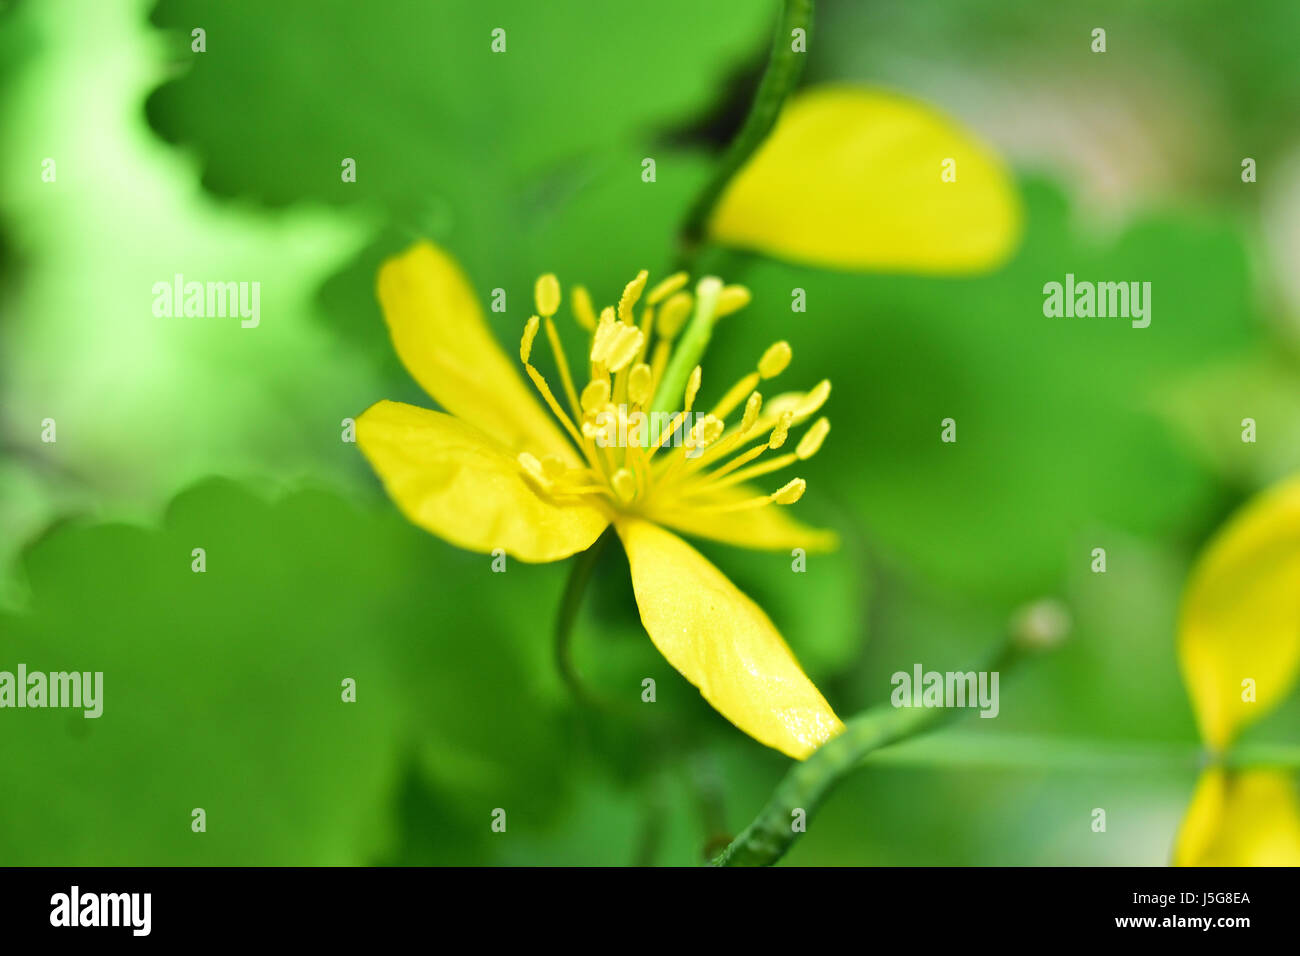 Close up of little yellow flower with blurred green background Stock Photo